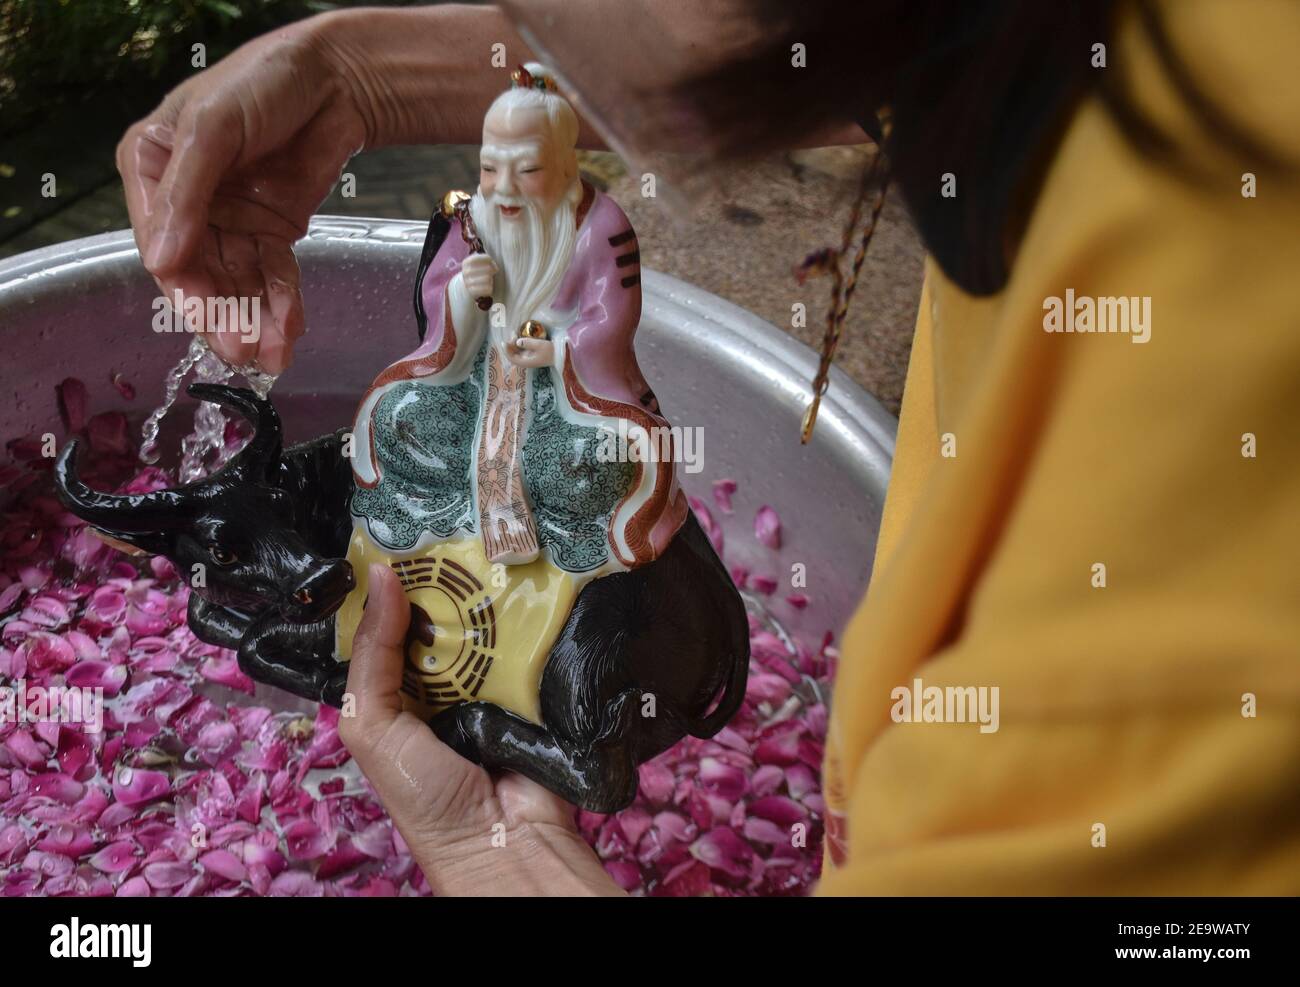 February 5, 2021, Malang, east java, Indonesia: A devotee clean statues of gods with the flower water ahead of the 2021 Chinese New Year celebrations or the entry of the Chinese zodiac metal buffalo in Chinese cultural beliefs at a temple in Malang, East Java, Indonesia, on February 6, 2021. Countries around Southeast Asia are set to welcome a subdued Lunar New Year with celebration curtail due to the Covid-19 Coronavirus pandemic.Indonesia is the largest Muslim country in the world. which has hundreds of tribes, cultures, and 6 religions that are protected by state law. Live in harmony in an  Stock Photo